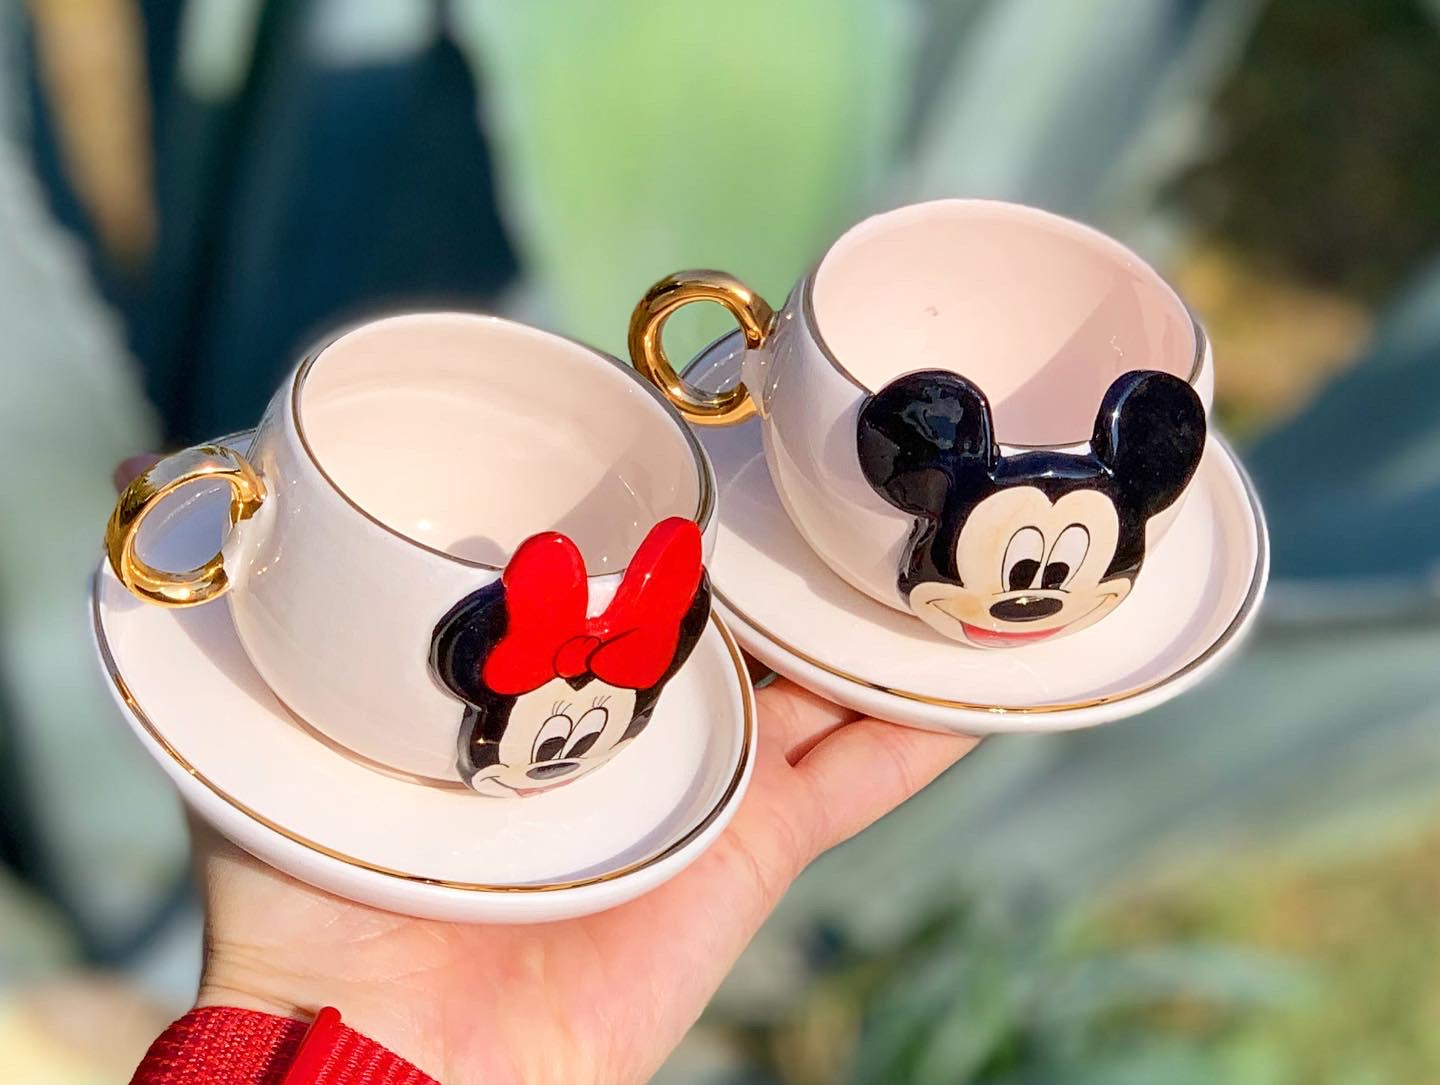 Mickey Mouse Coffee Cup White